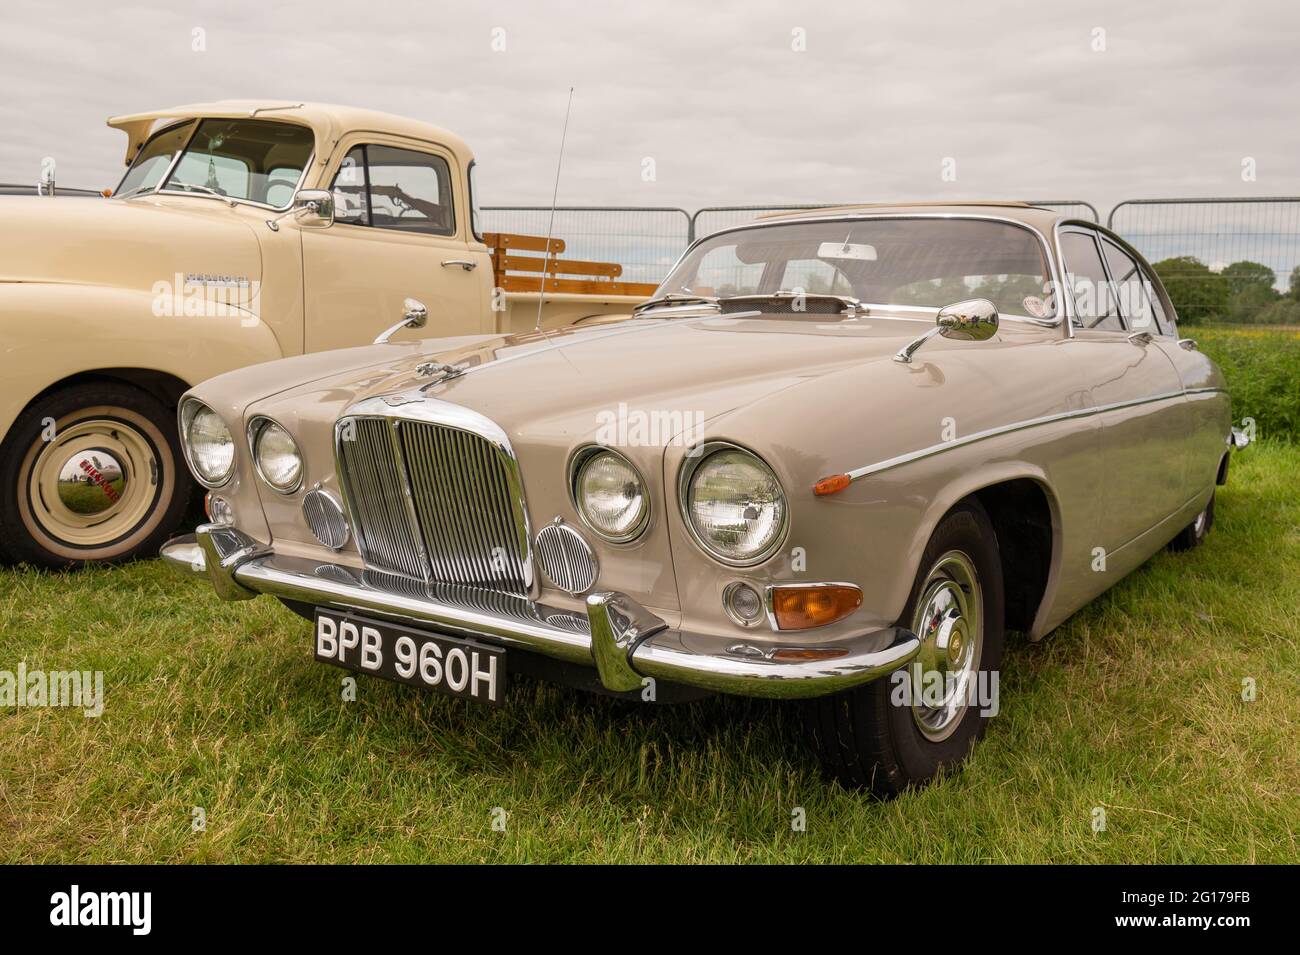 An old Jaguar mark 10 in lovley condition at a classic car show Stock Photo